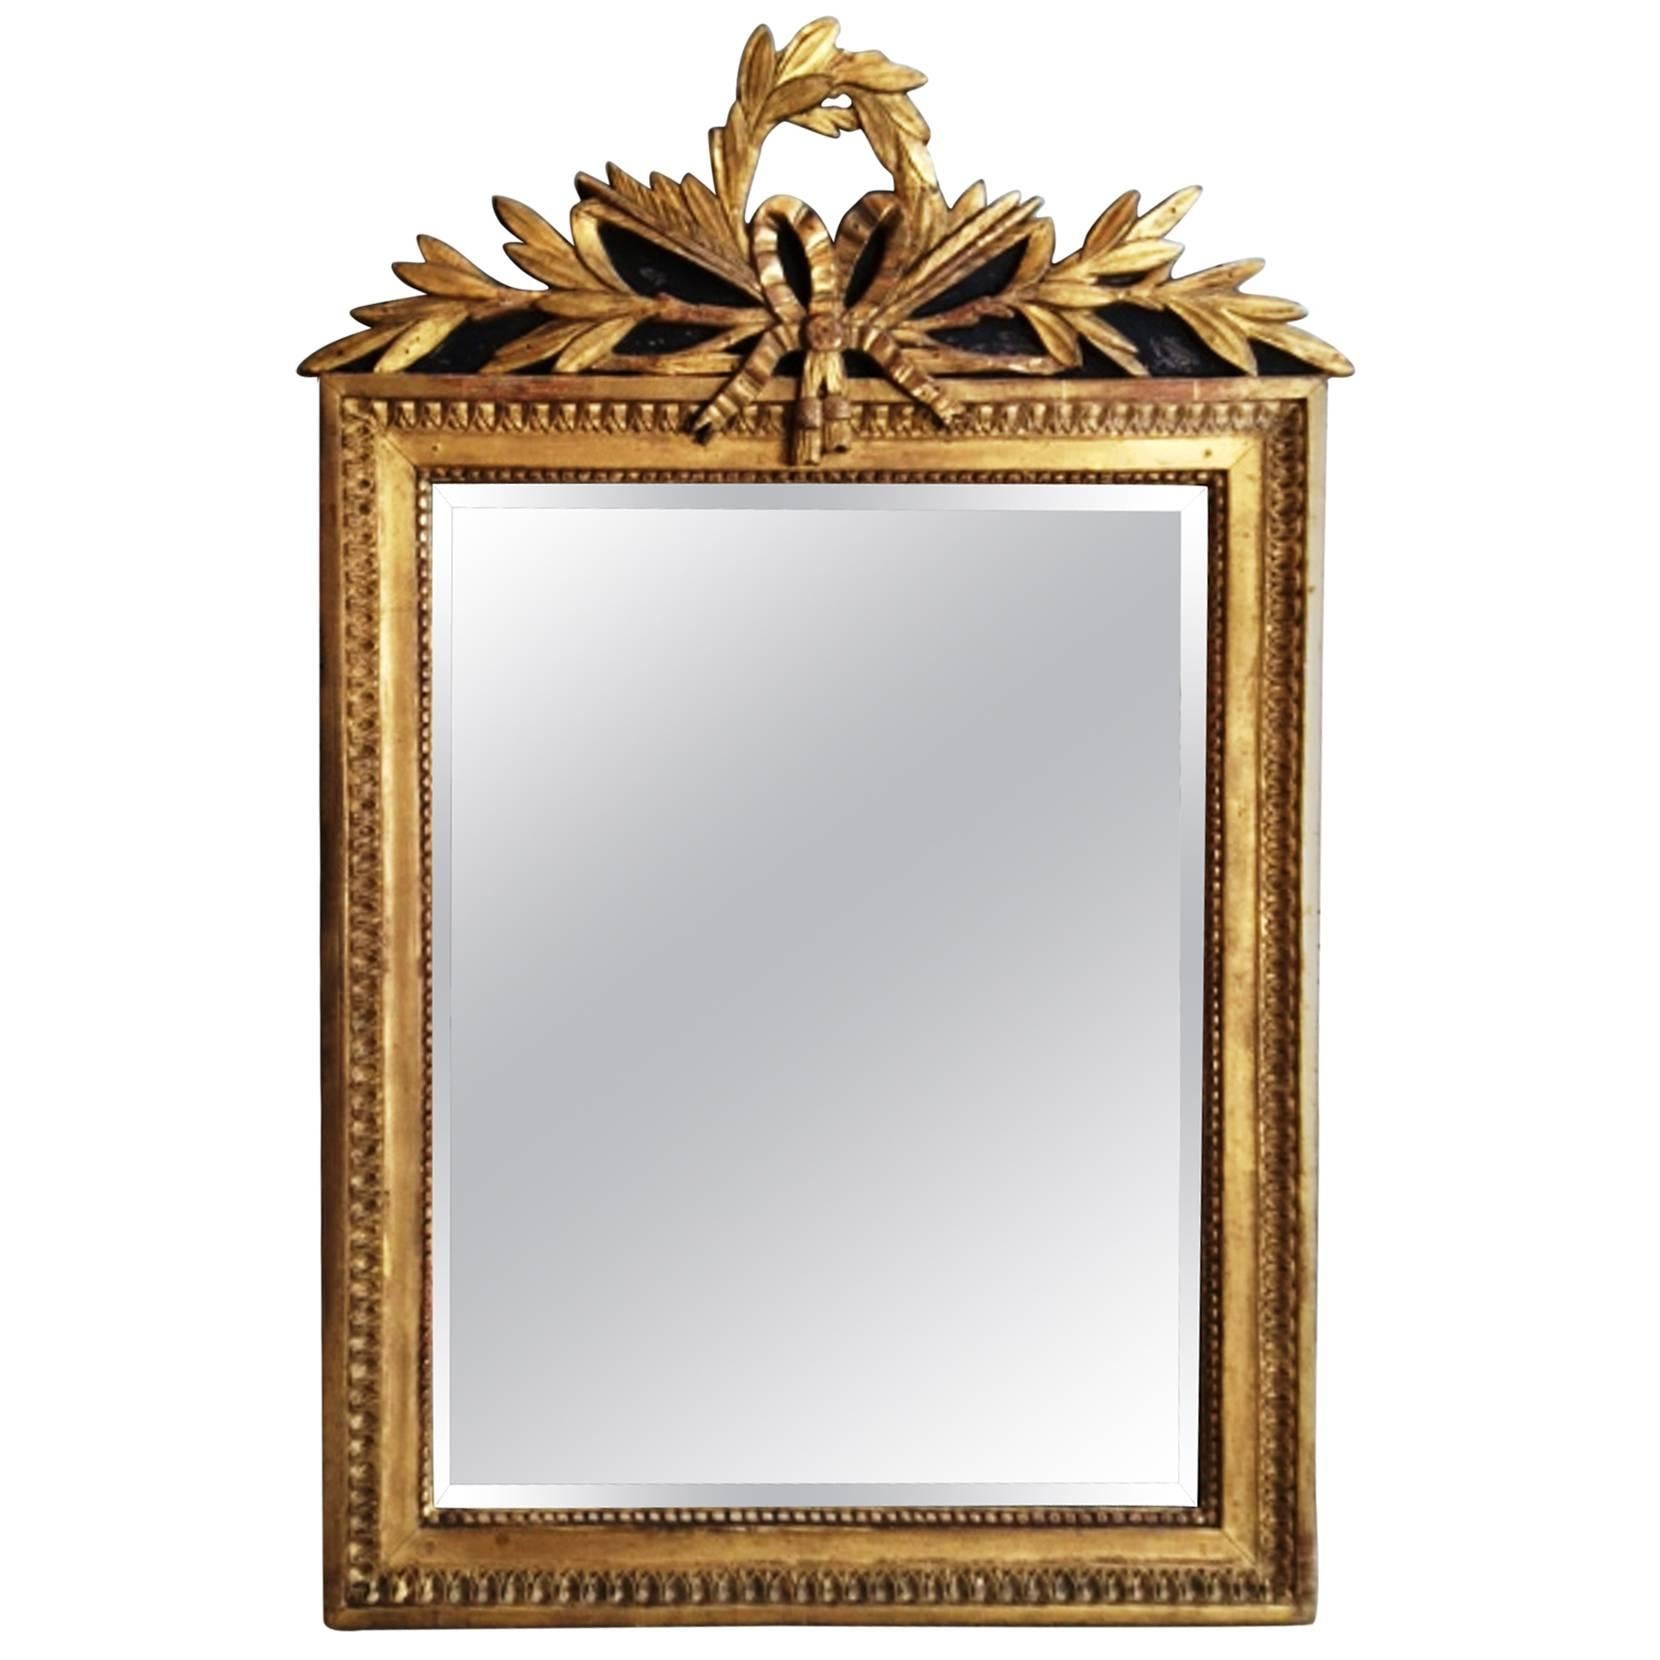 French Louis XVI Period Carved Giltwood Wall Mirror, France, 18th Century